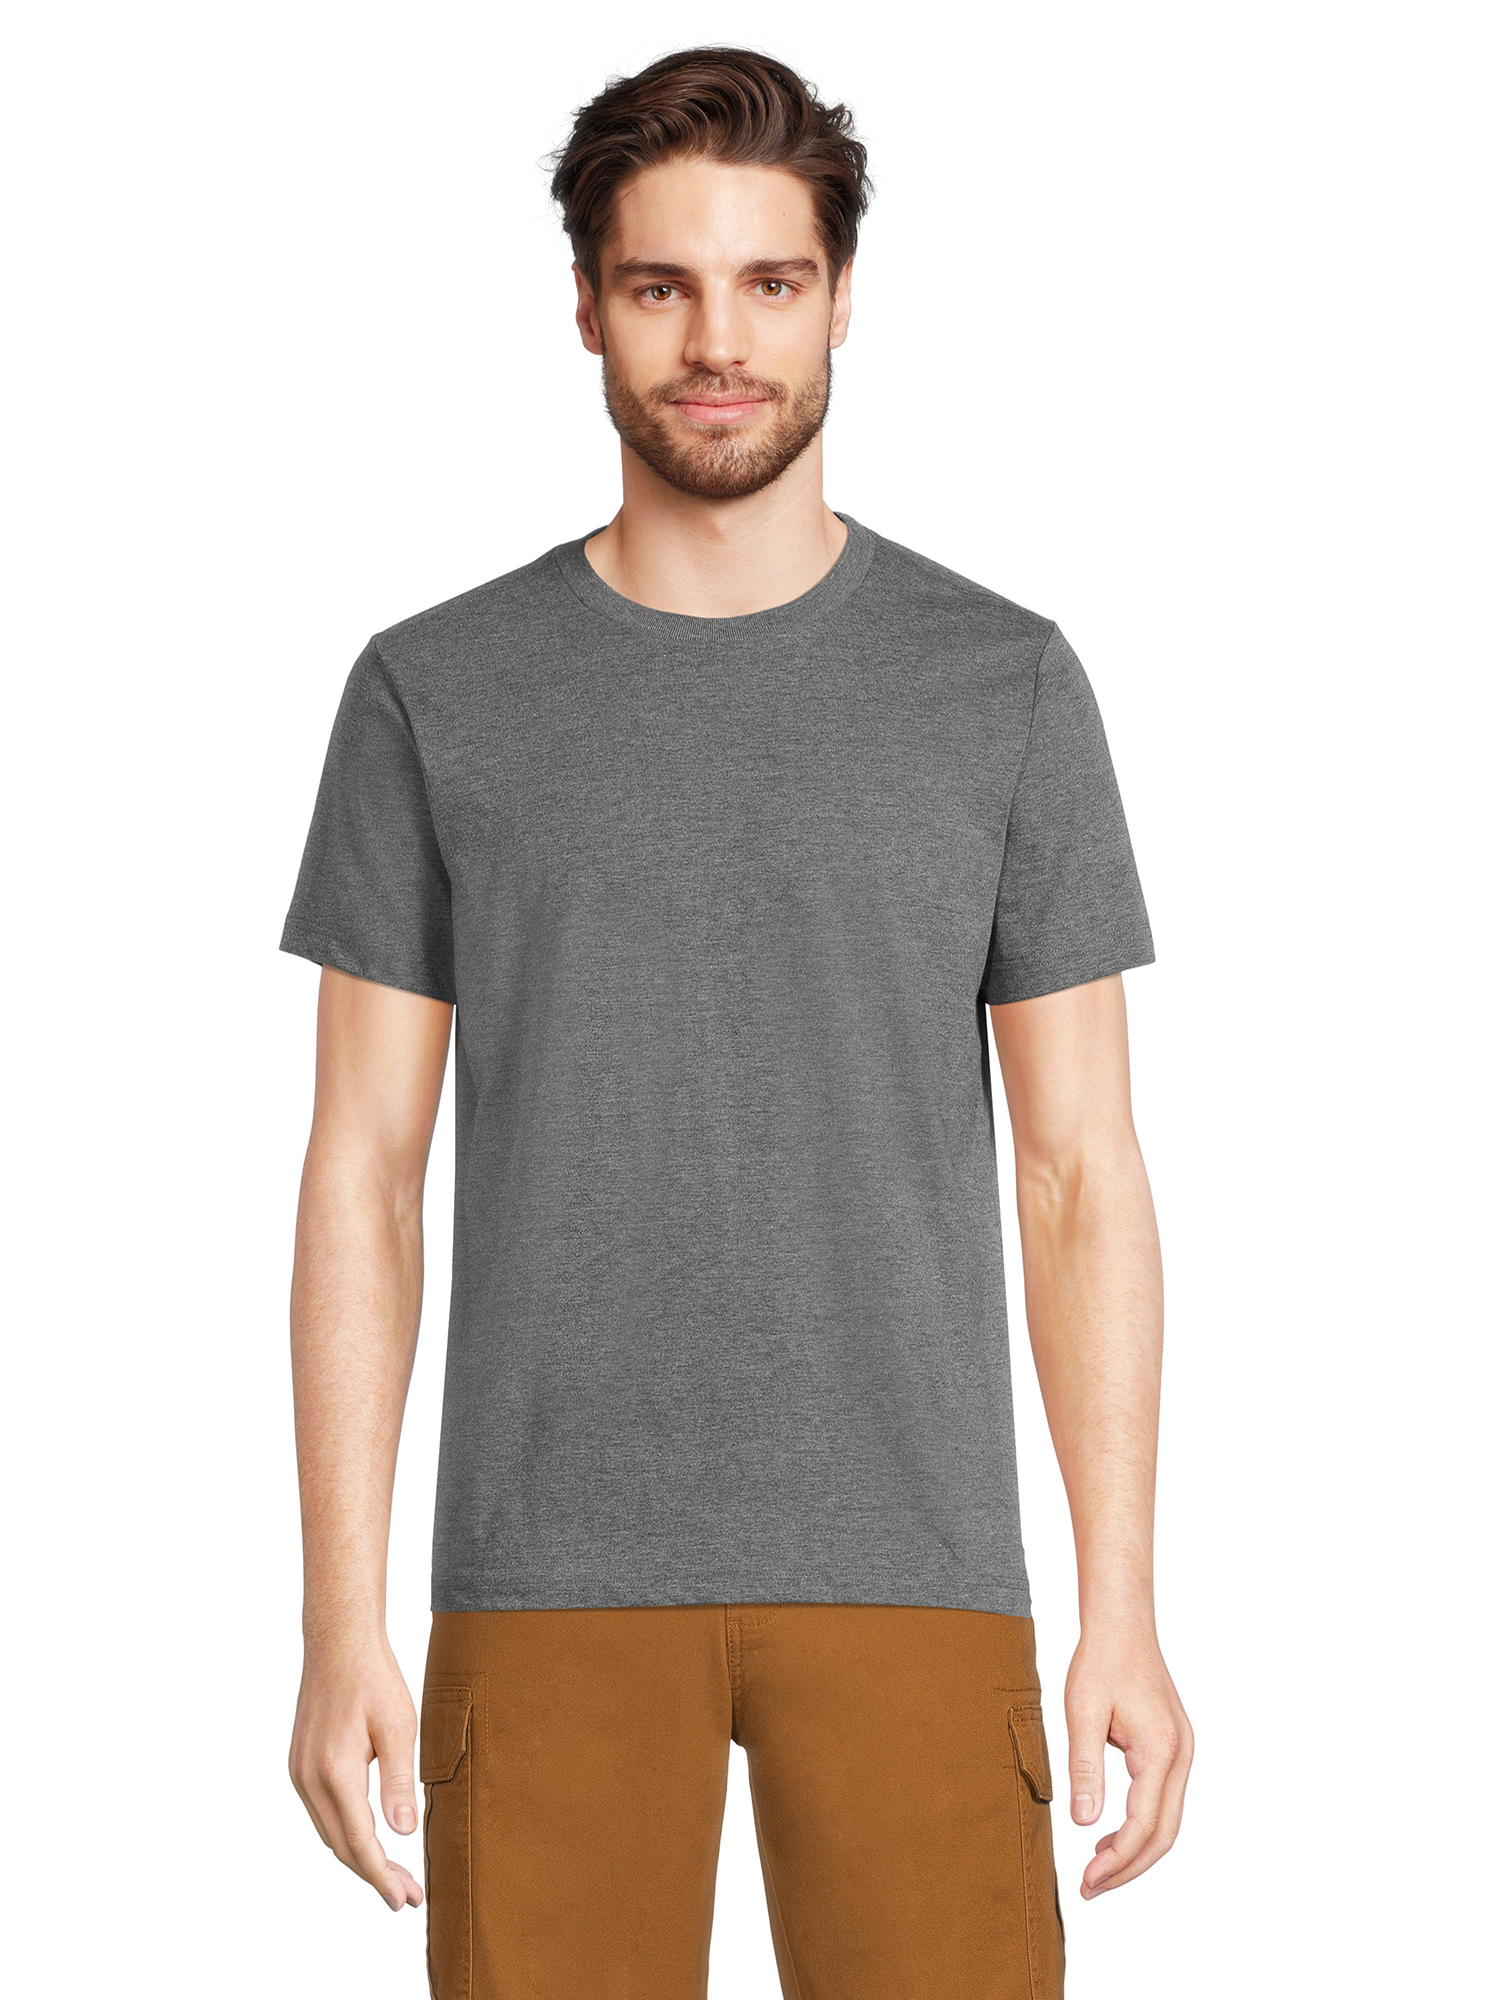 George Men's & Big Men's Crewneck Tee with Short Sleeves, Sizes XS-3XL - image 1 of 5